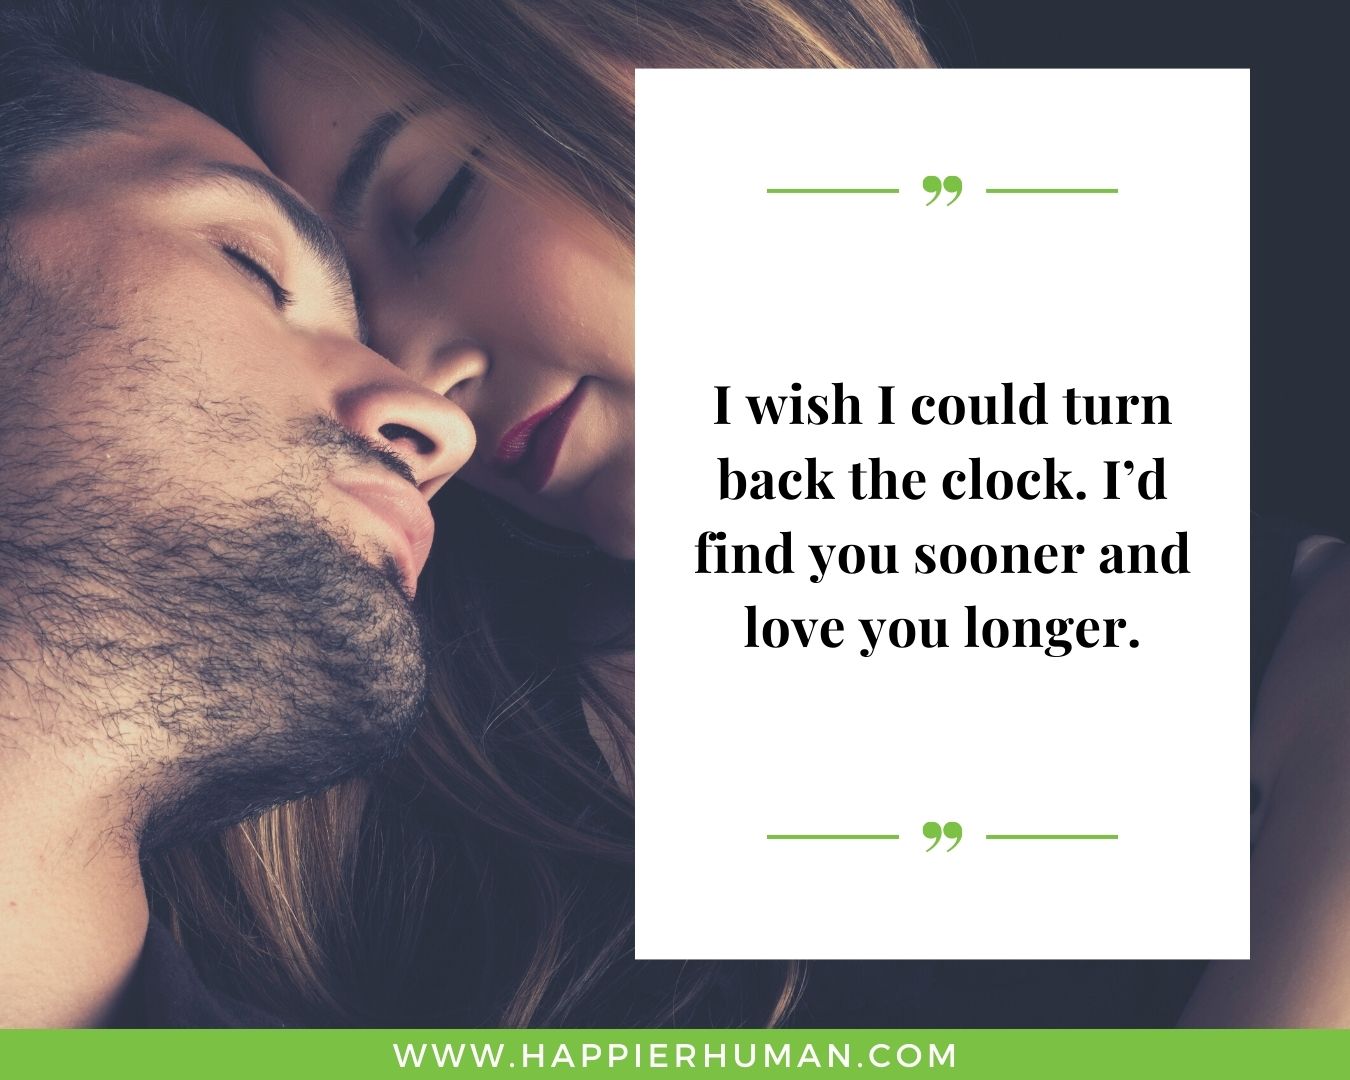 Funny Love Quotes for Her - “I wish I could turn back the clock. I’d find you sooner and love you longer.”